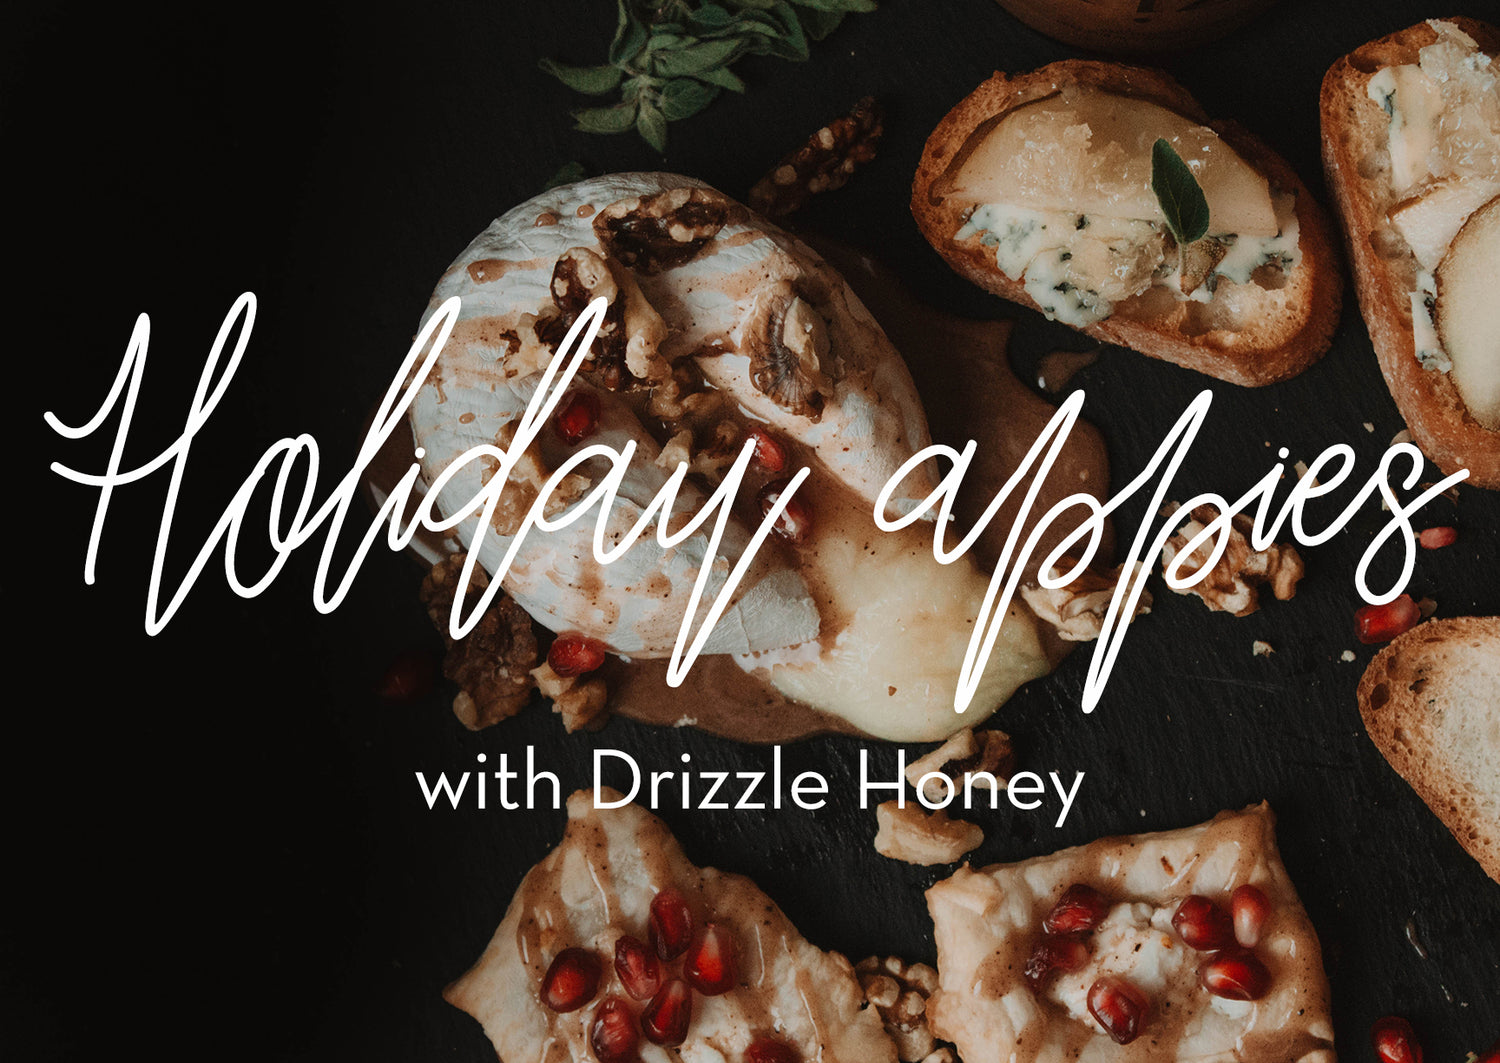 Holiday Appetizers with Drizzle Honey